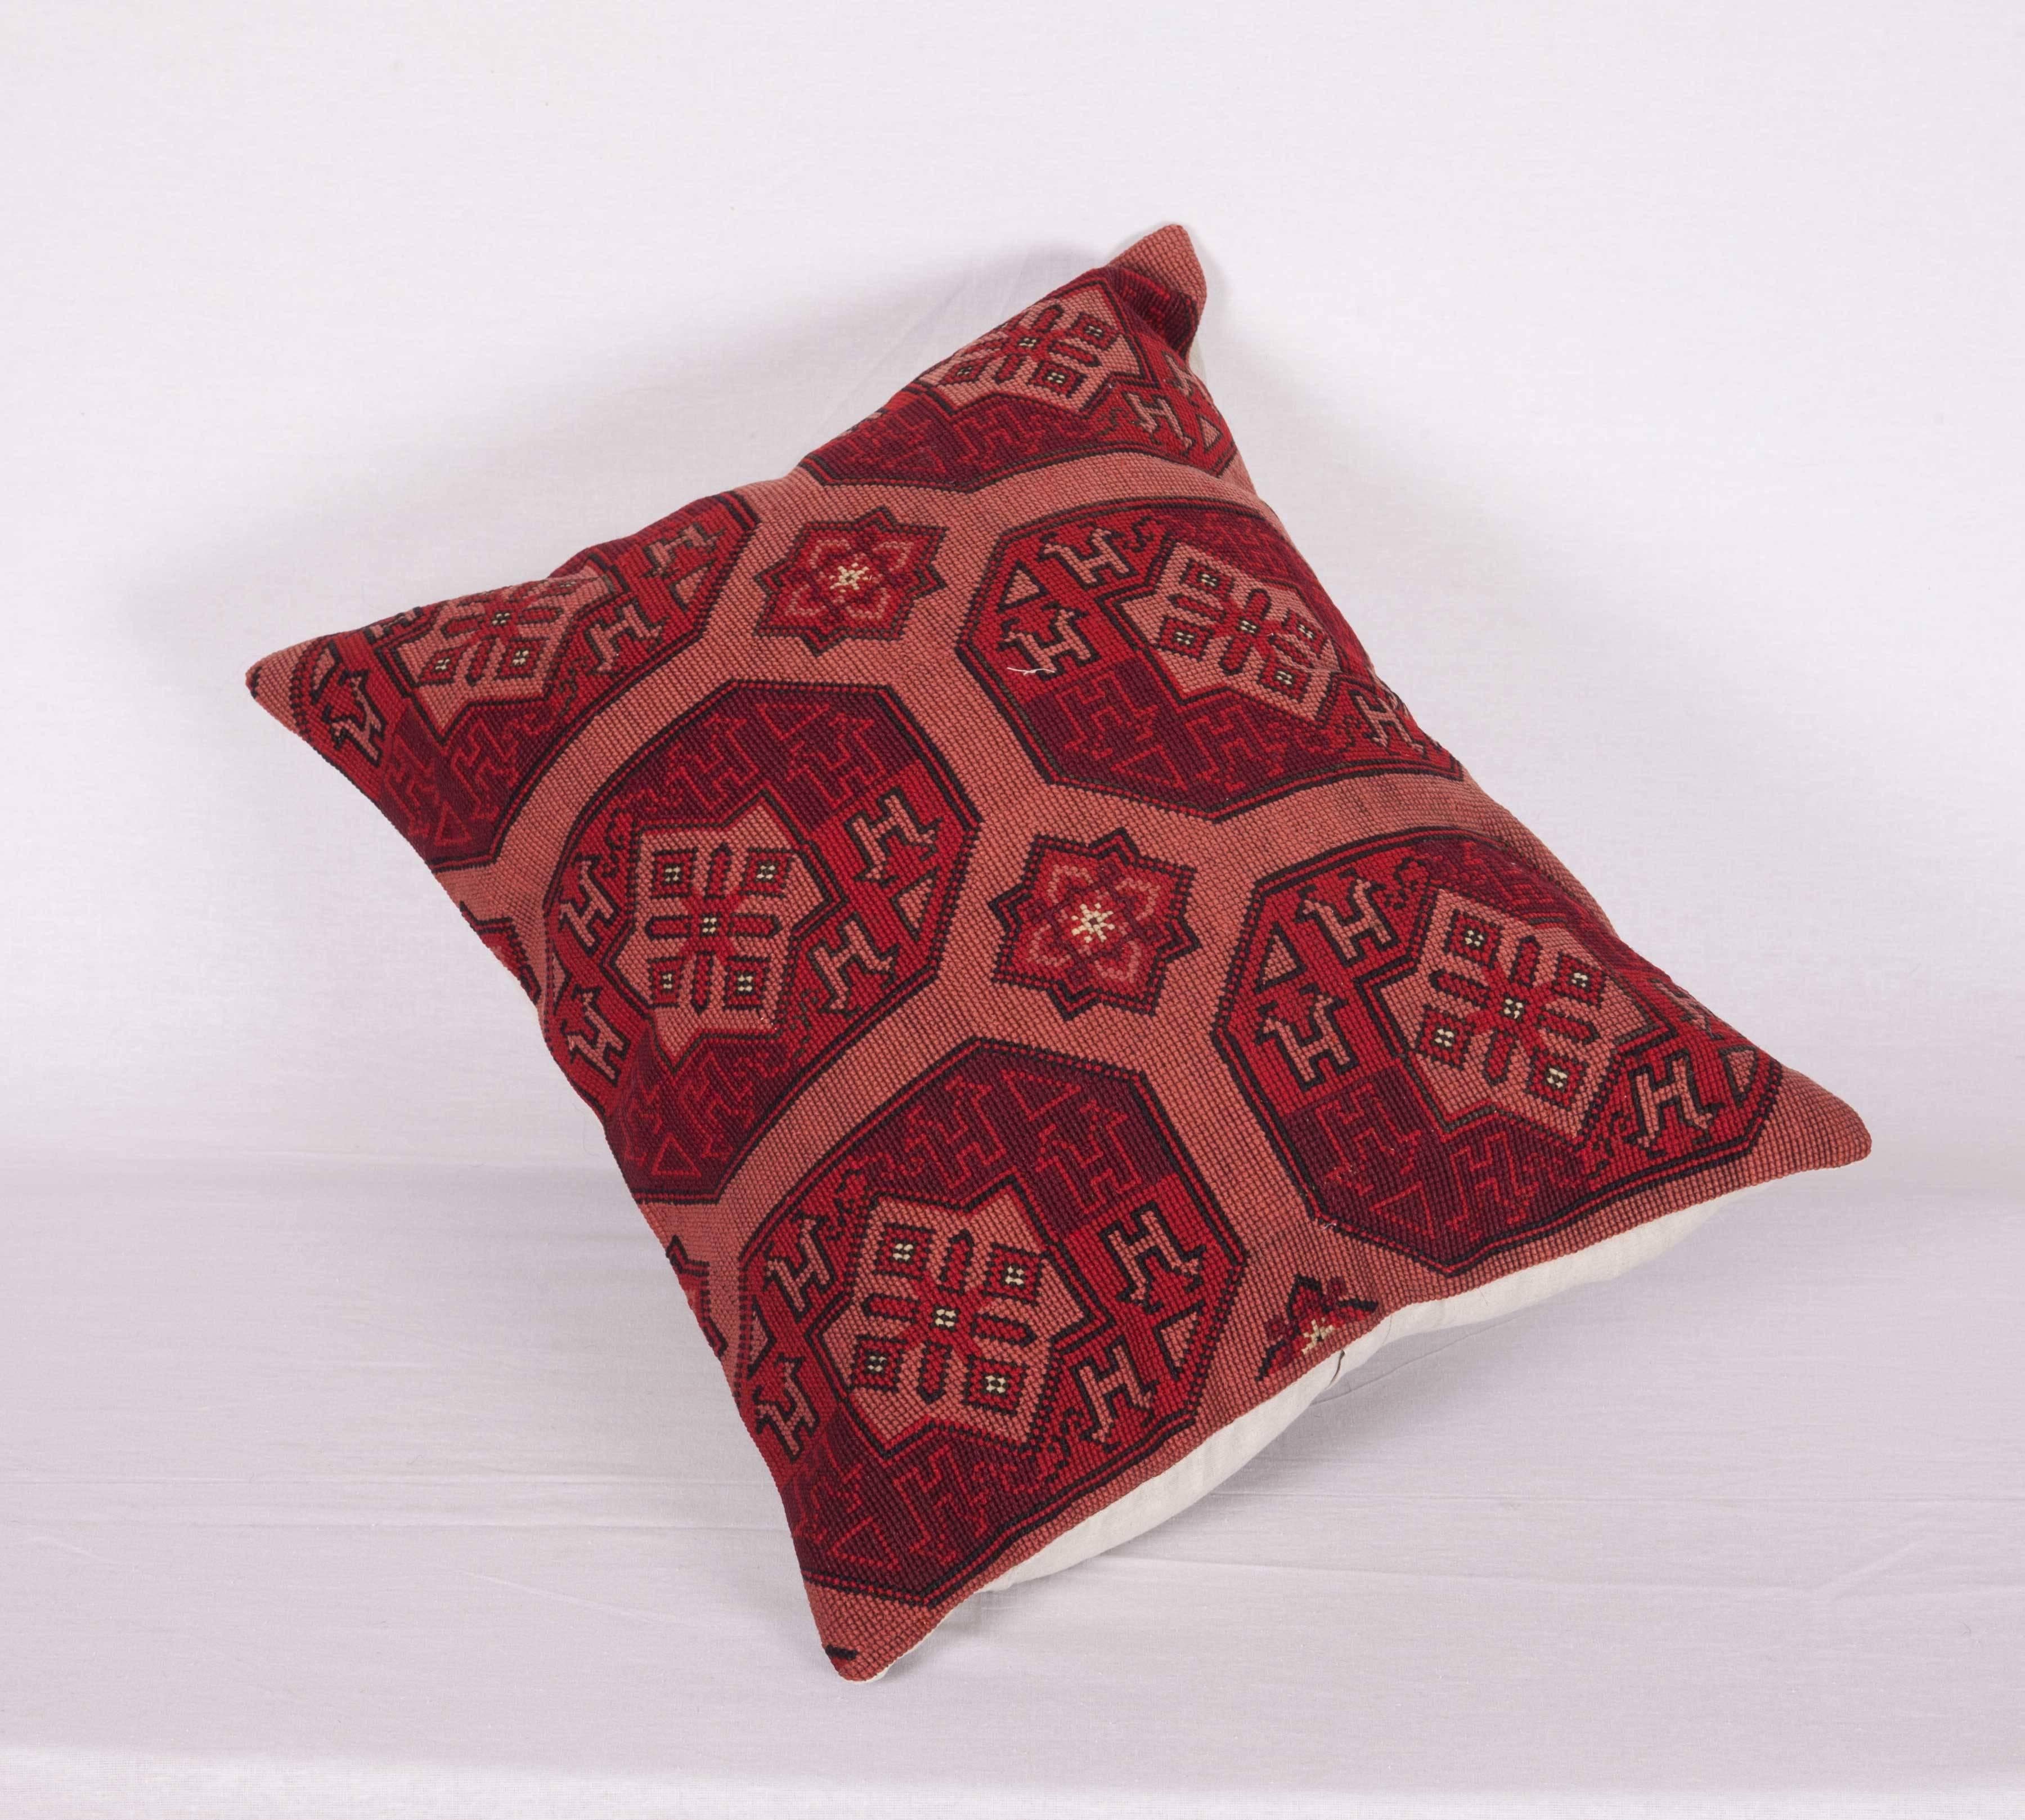 The pillow is made out of a early 20th century. Central Asian Embroidery done in cross stitch technique.
It does not come with an insert but it comes with a bag made to the size and out of cotton to accommodate the filling.
The backing is made of